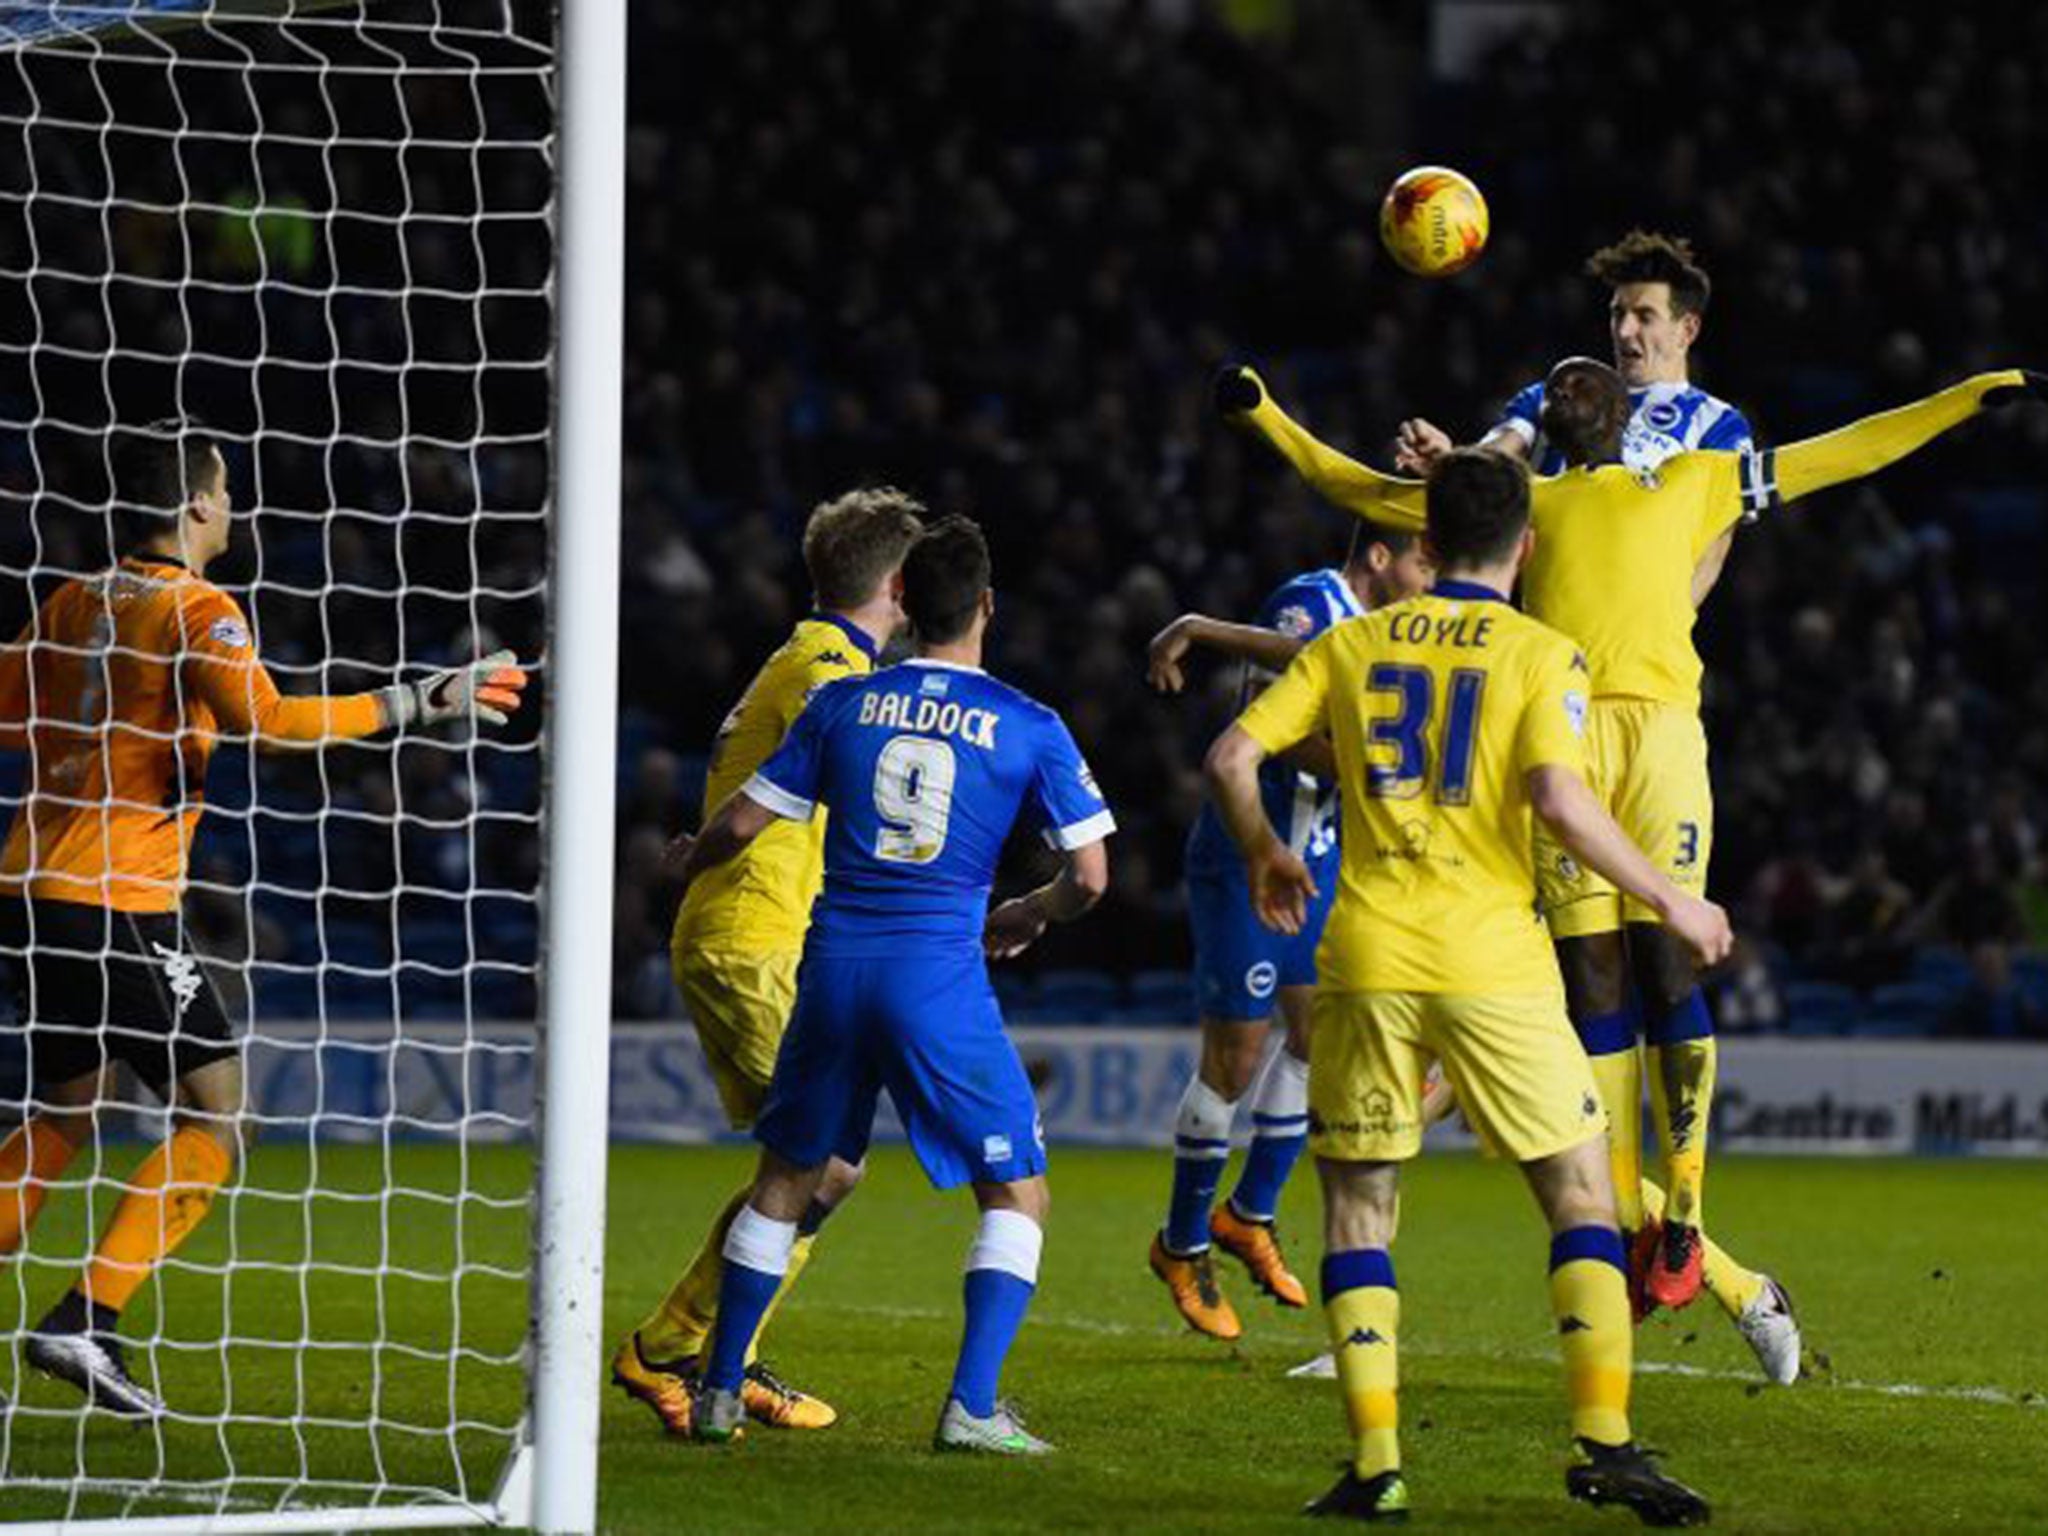 Lewis Dunk heads home to put Brighton 4-0 ahead after just 38 minutes against Leeds at the Amex Stadium